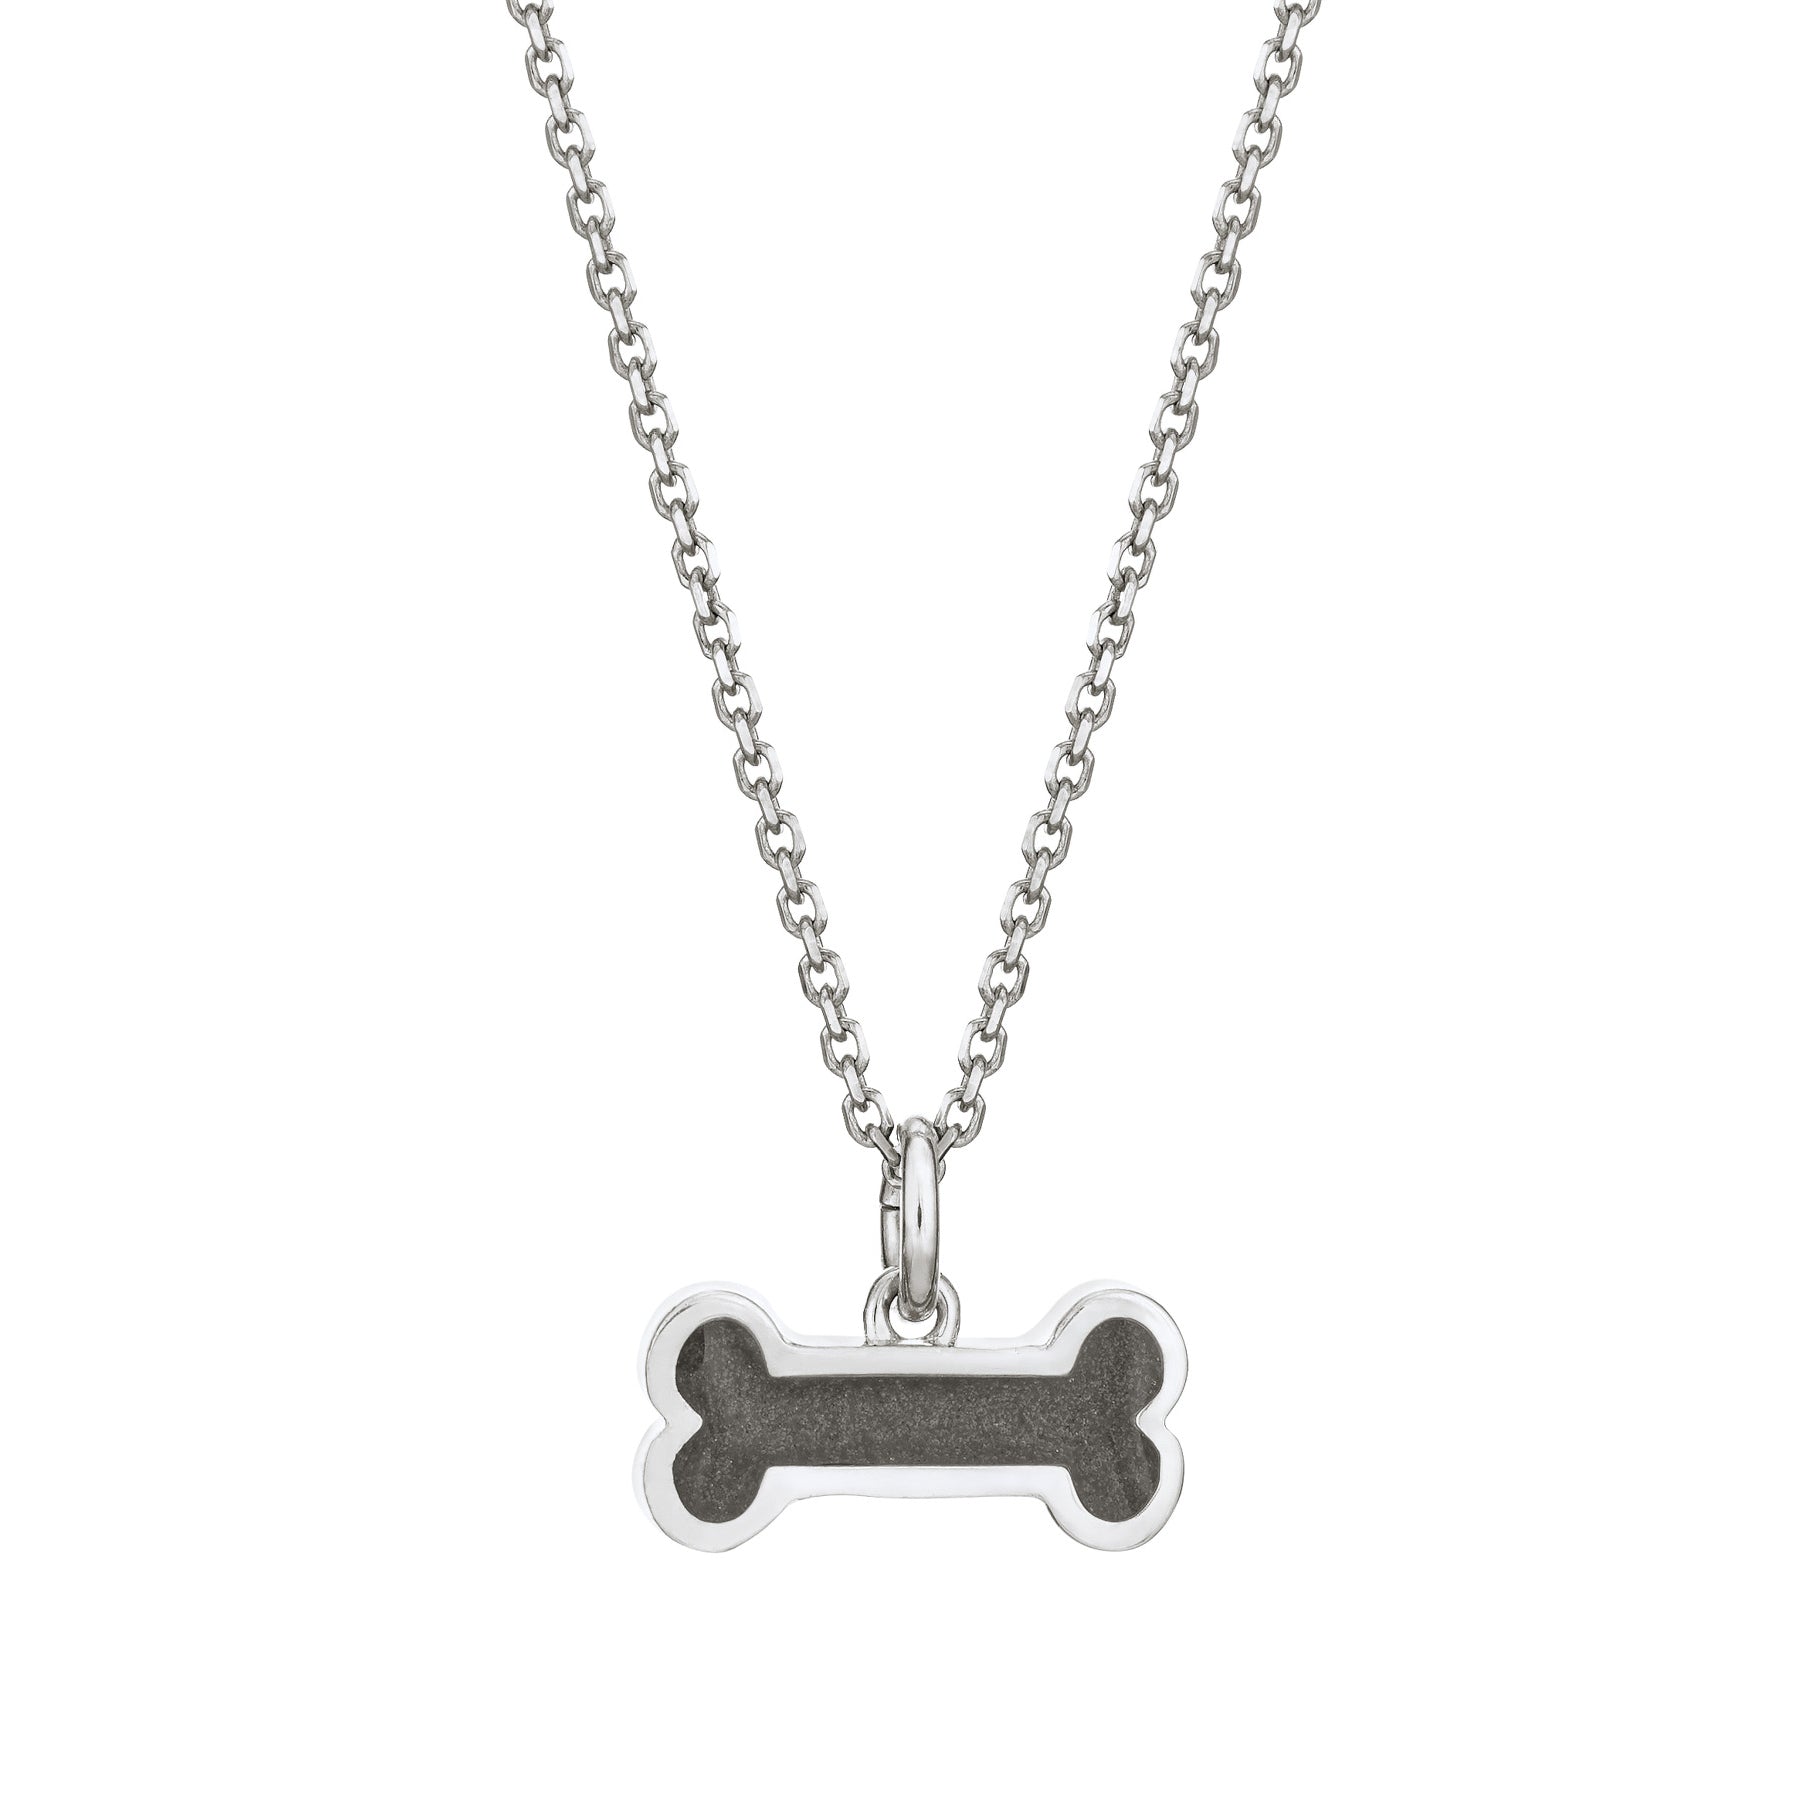 10mm Dome Cremation Necklace in 14K White Gold – closebymejewelry